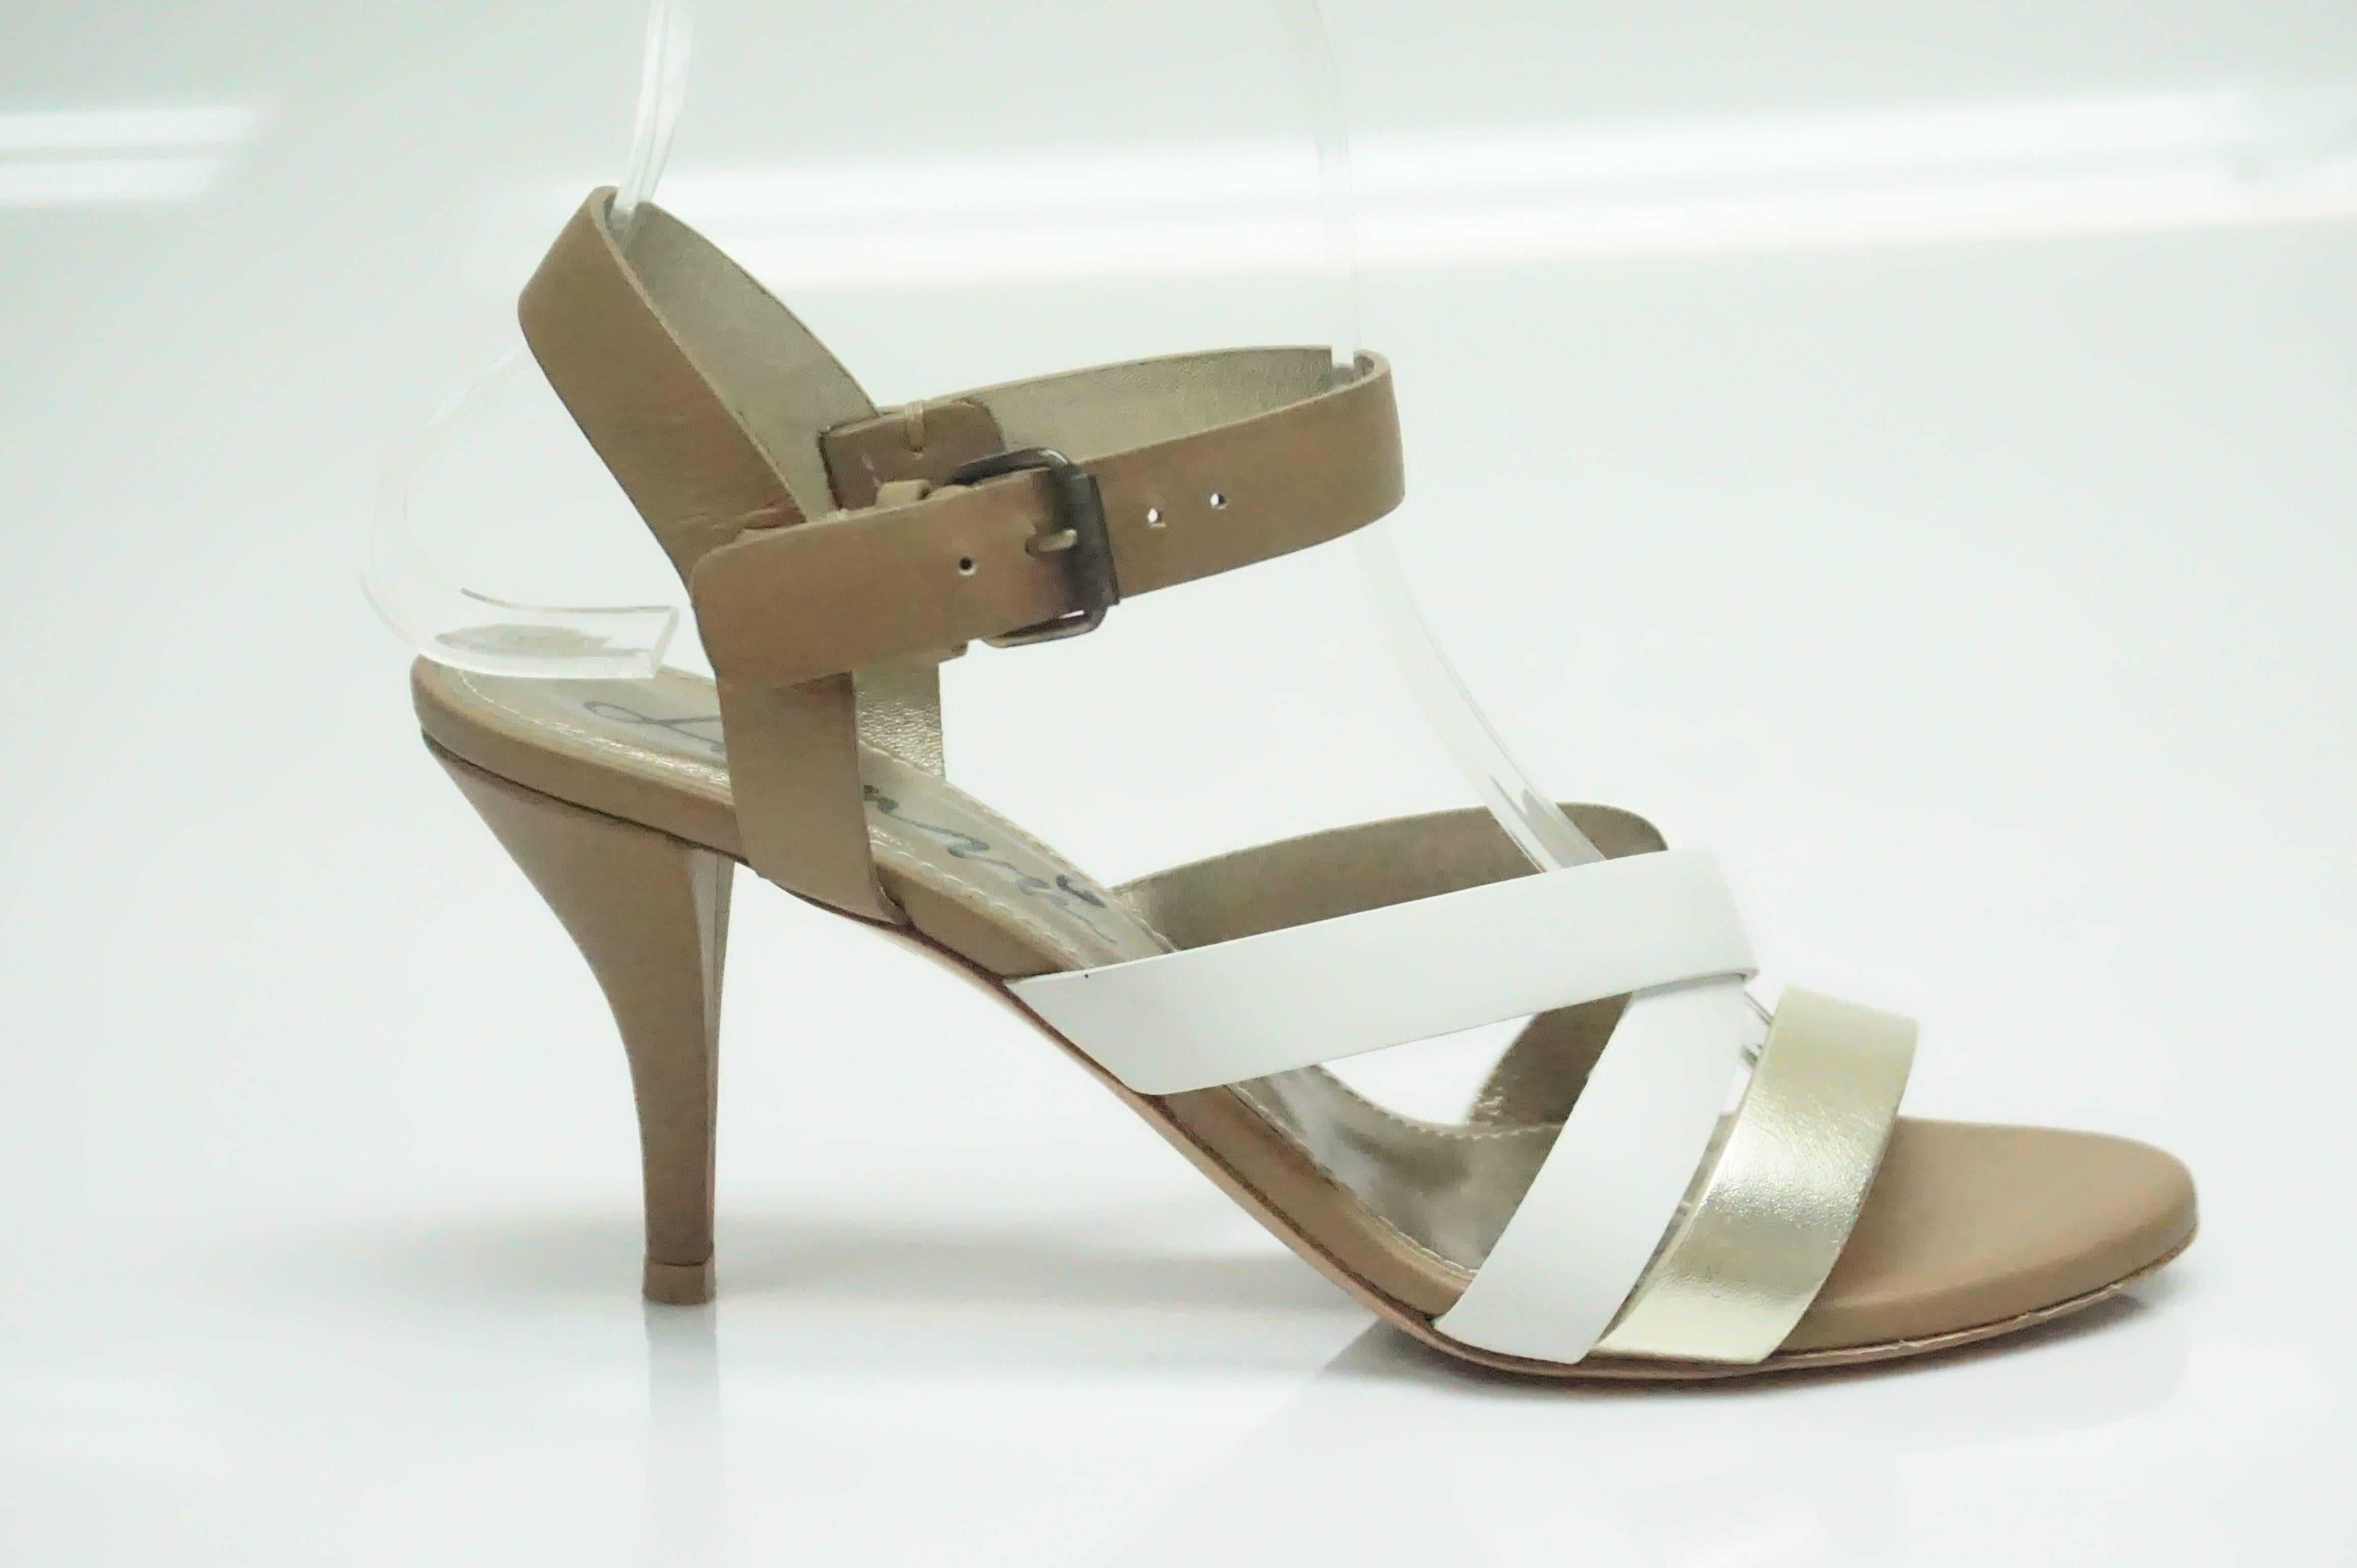 Lanvin Brown/White/Metallic Gold Strappy Heel - 37  This beautiful heel is in excellent condition. The shoes have a white, brown, and metallic color to the straps. There is a buckle to adjust the ankle strap. 
Measurements
Heel Height: 3.5